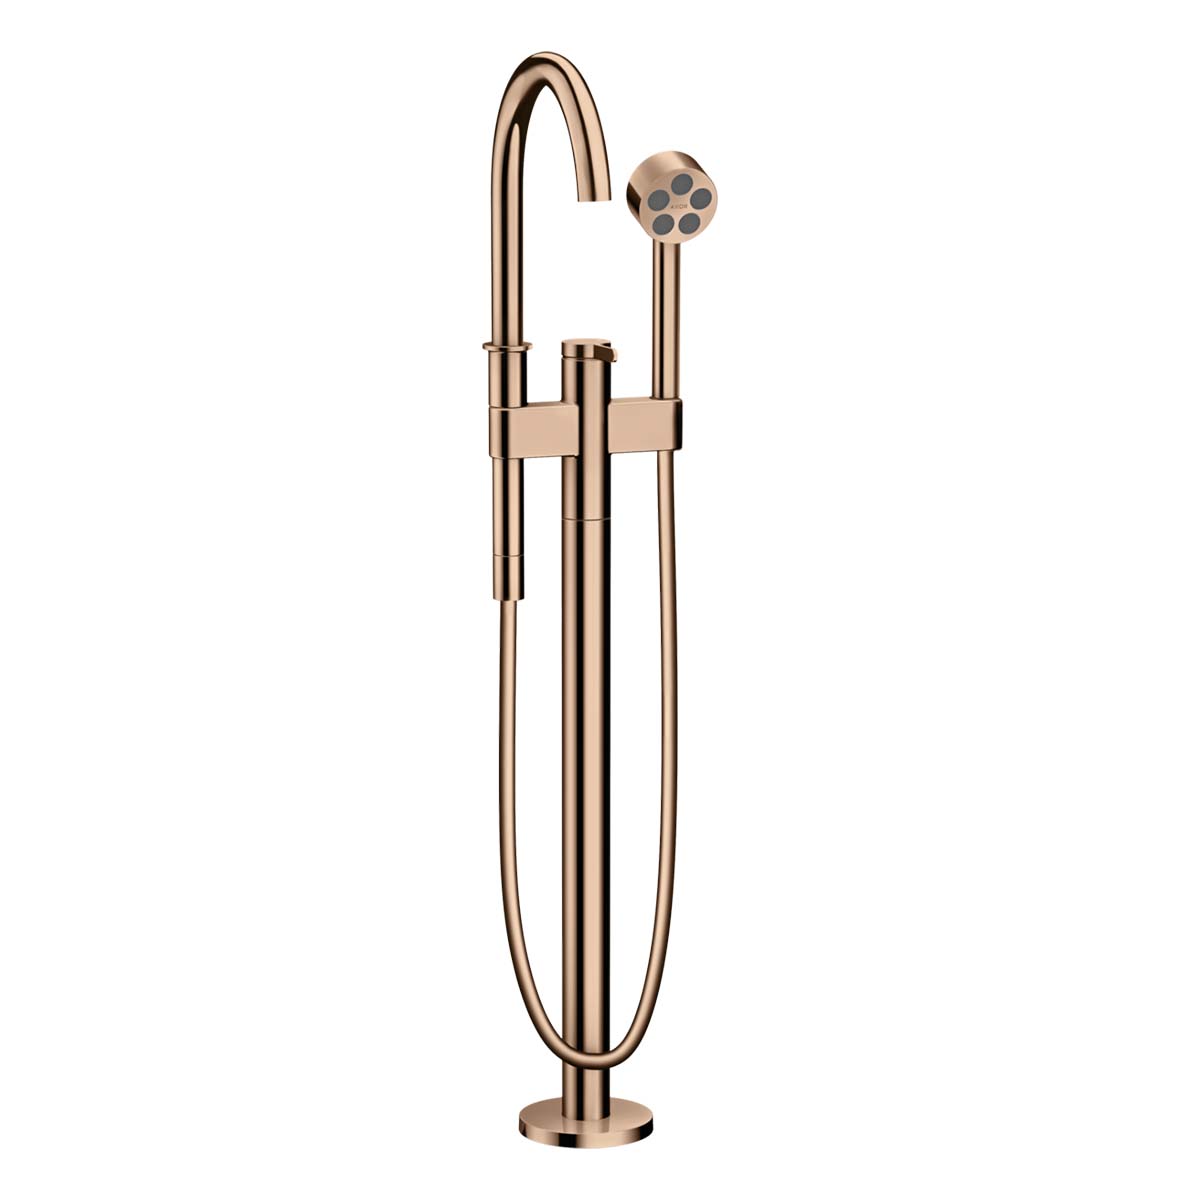 Axor One Floorstanding Bath Shower Mixer With Handset Polished Red Gold